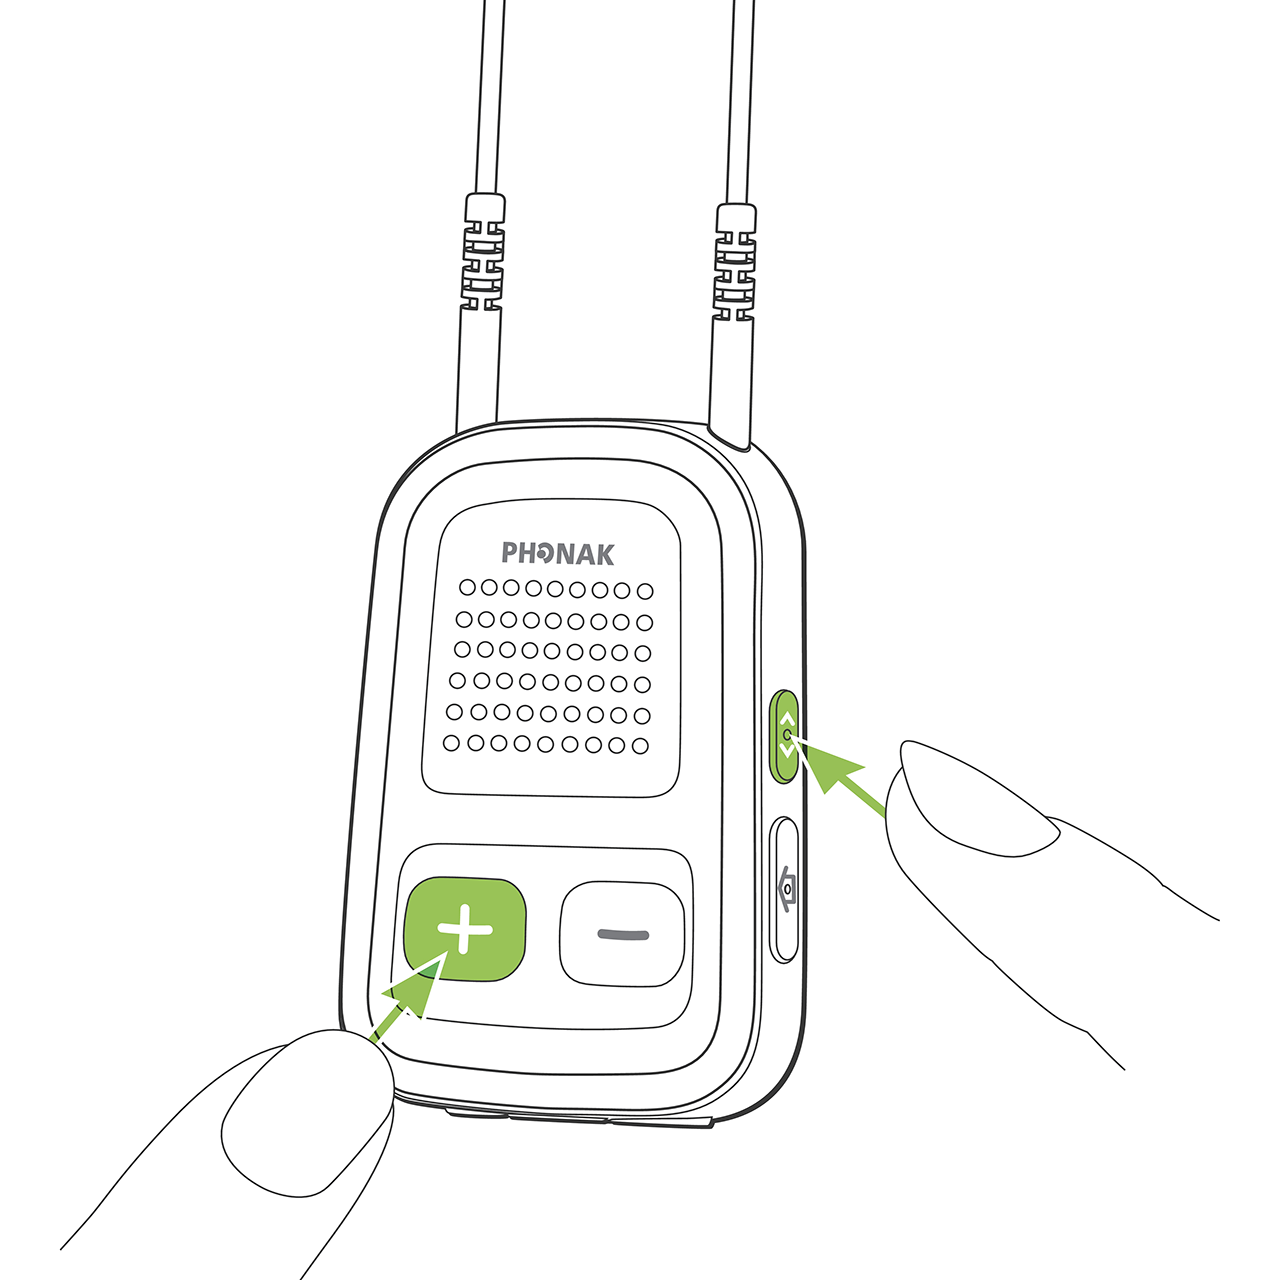 Support for Phonak ComPilot II